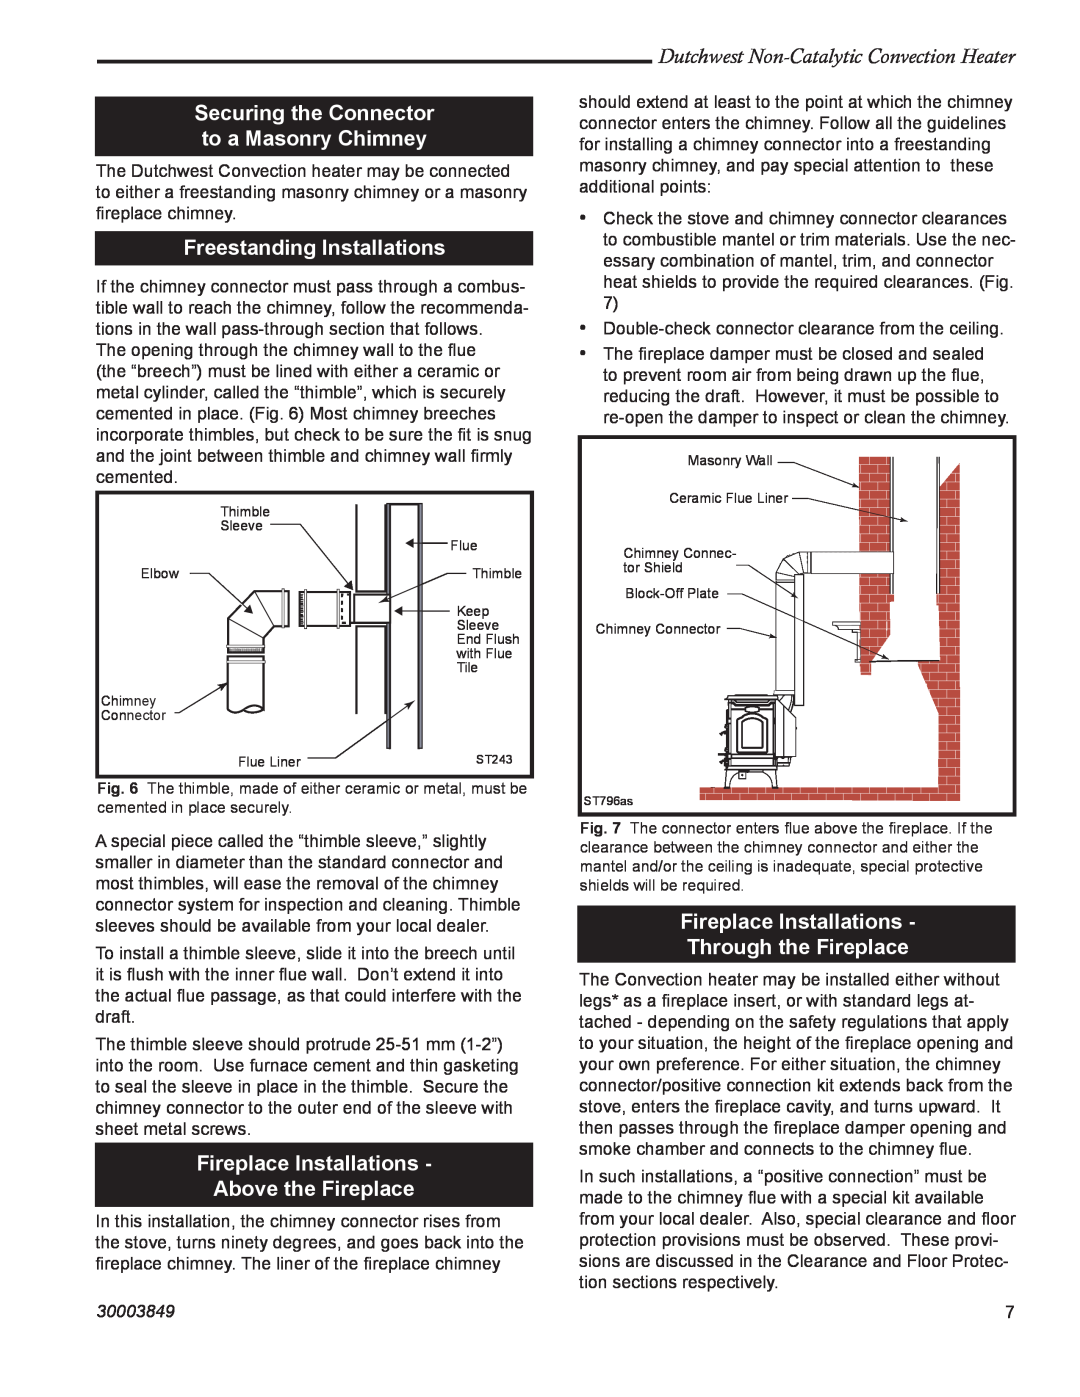 Vermont Casting 2477CE manual Securing the Connector to a Masonry Chimney, Freestanding Installations, 30003849 